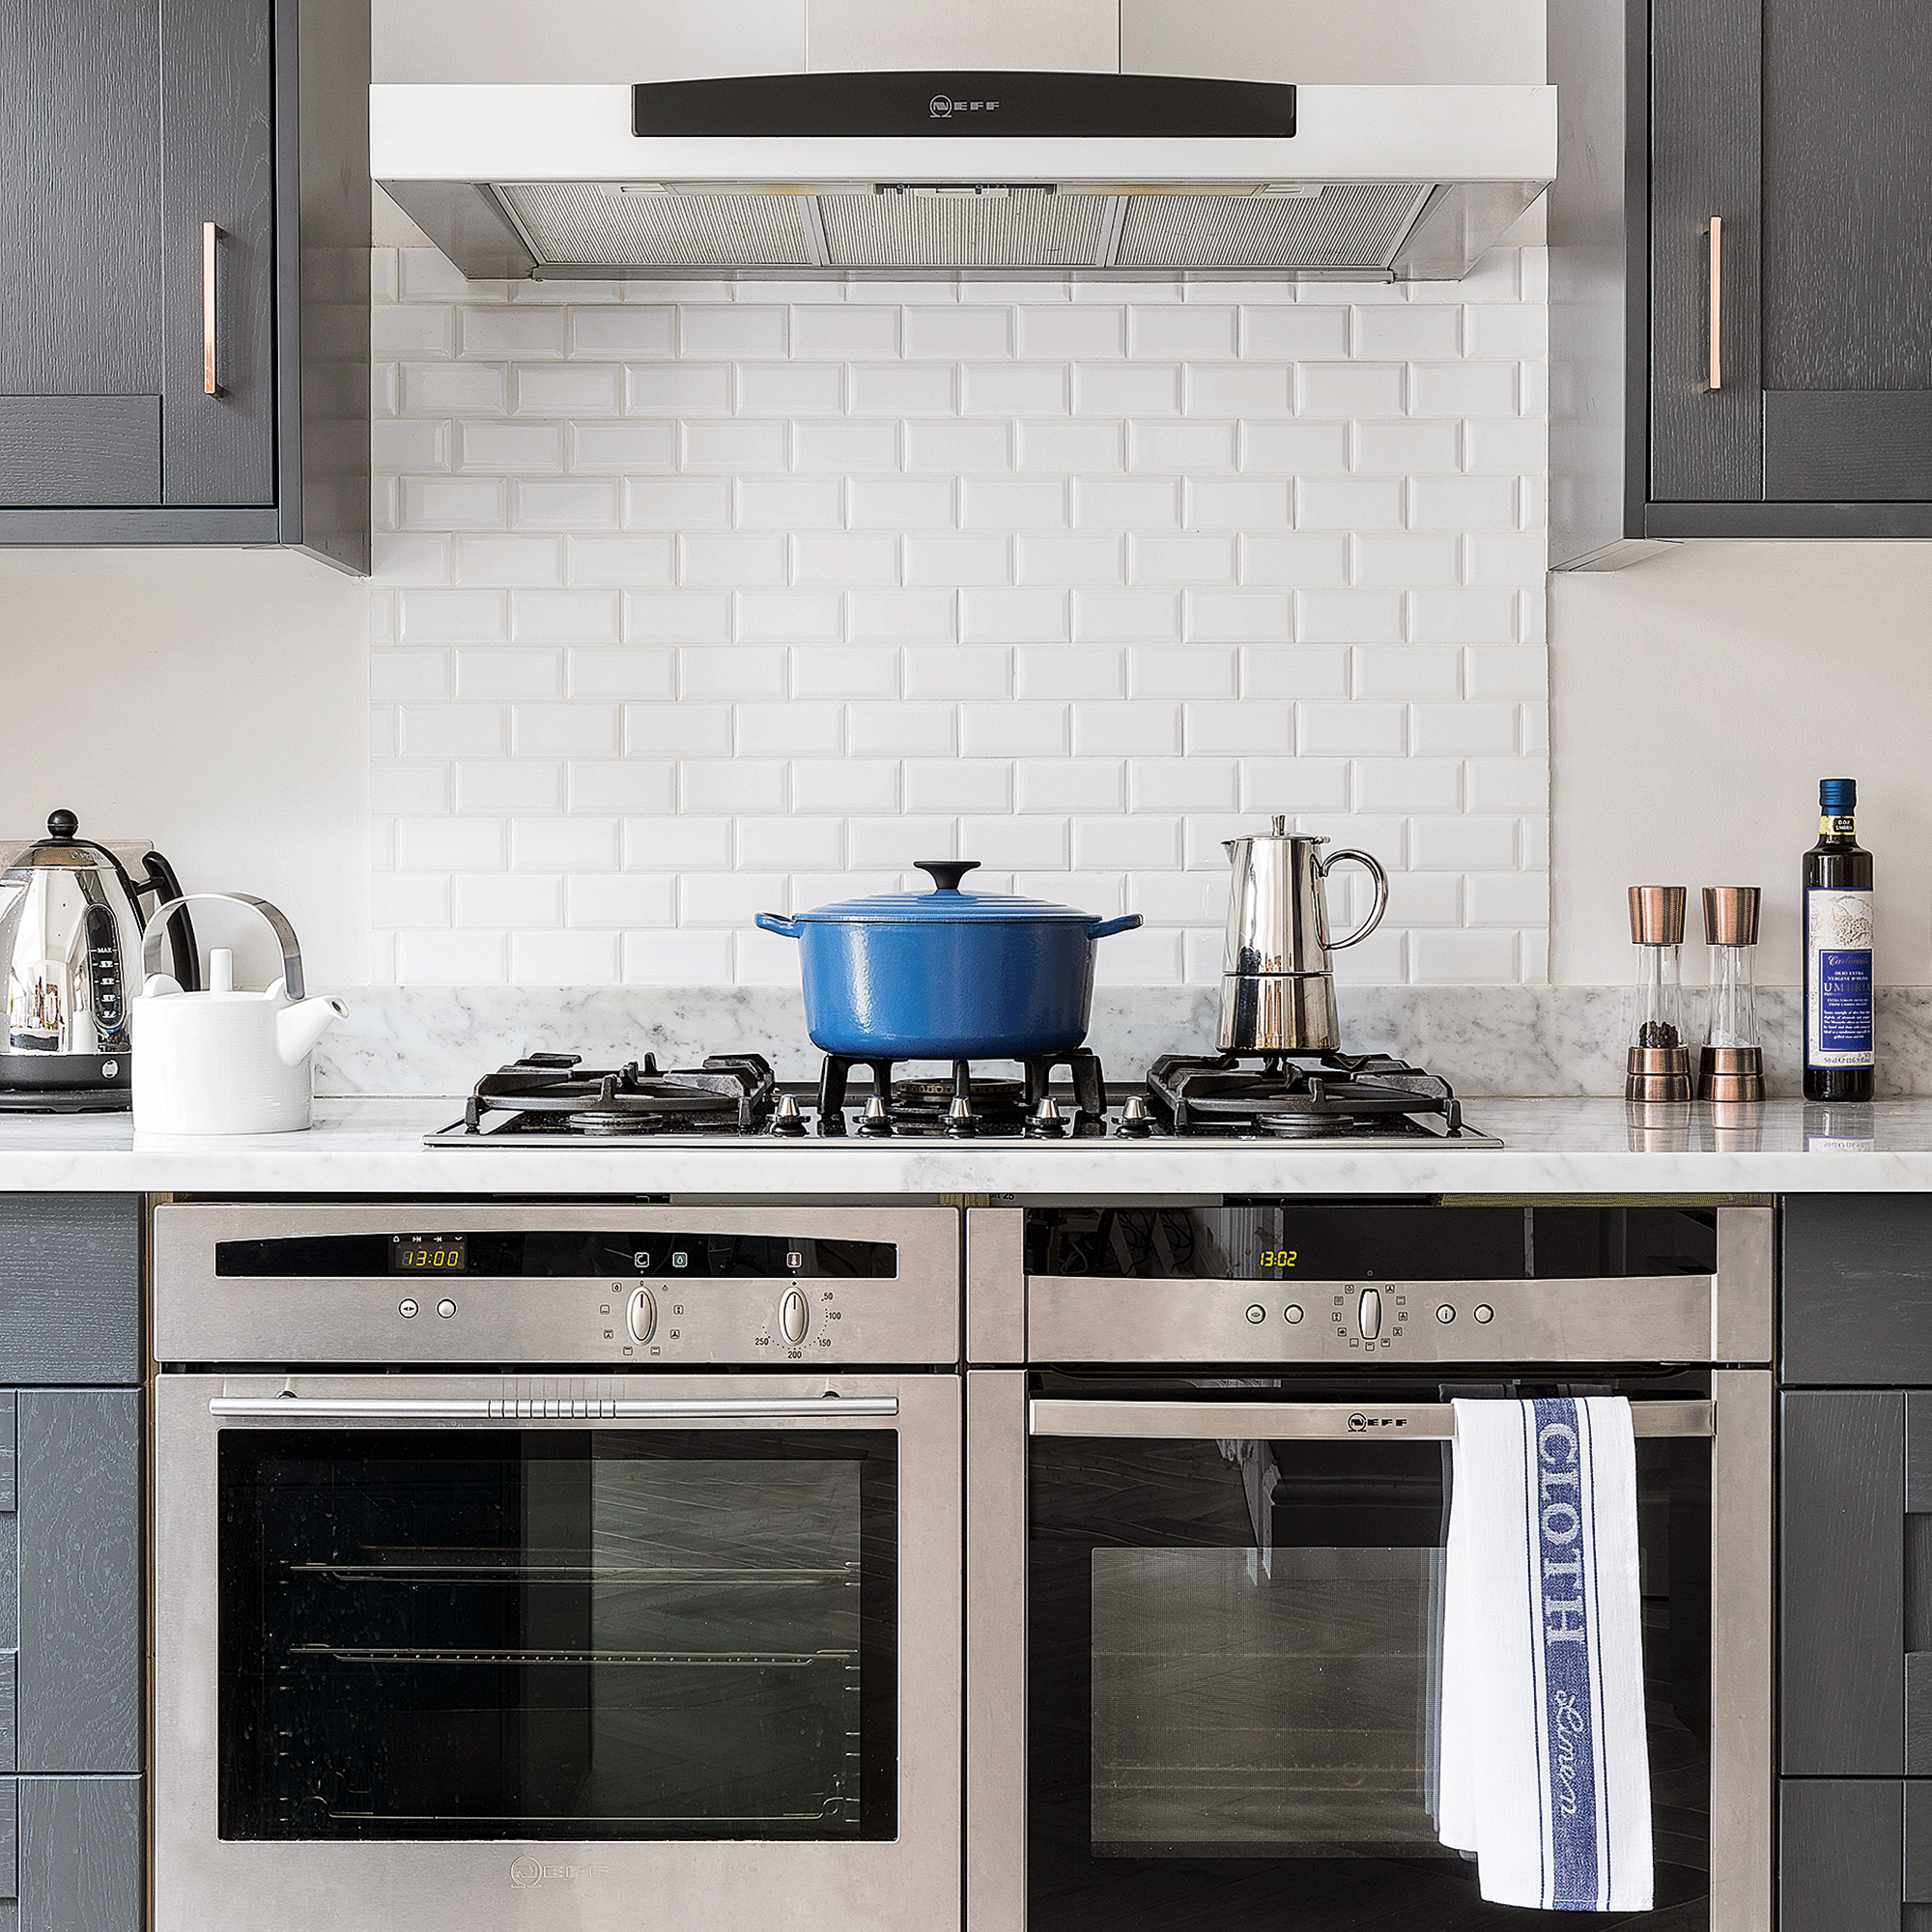 Kitchen with silver range and blue casserole dish